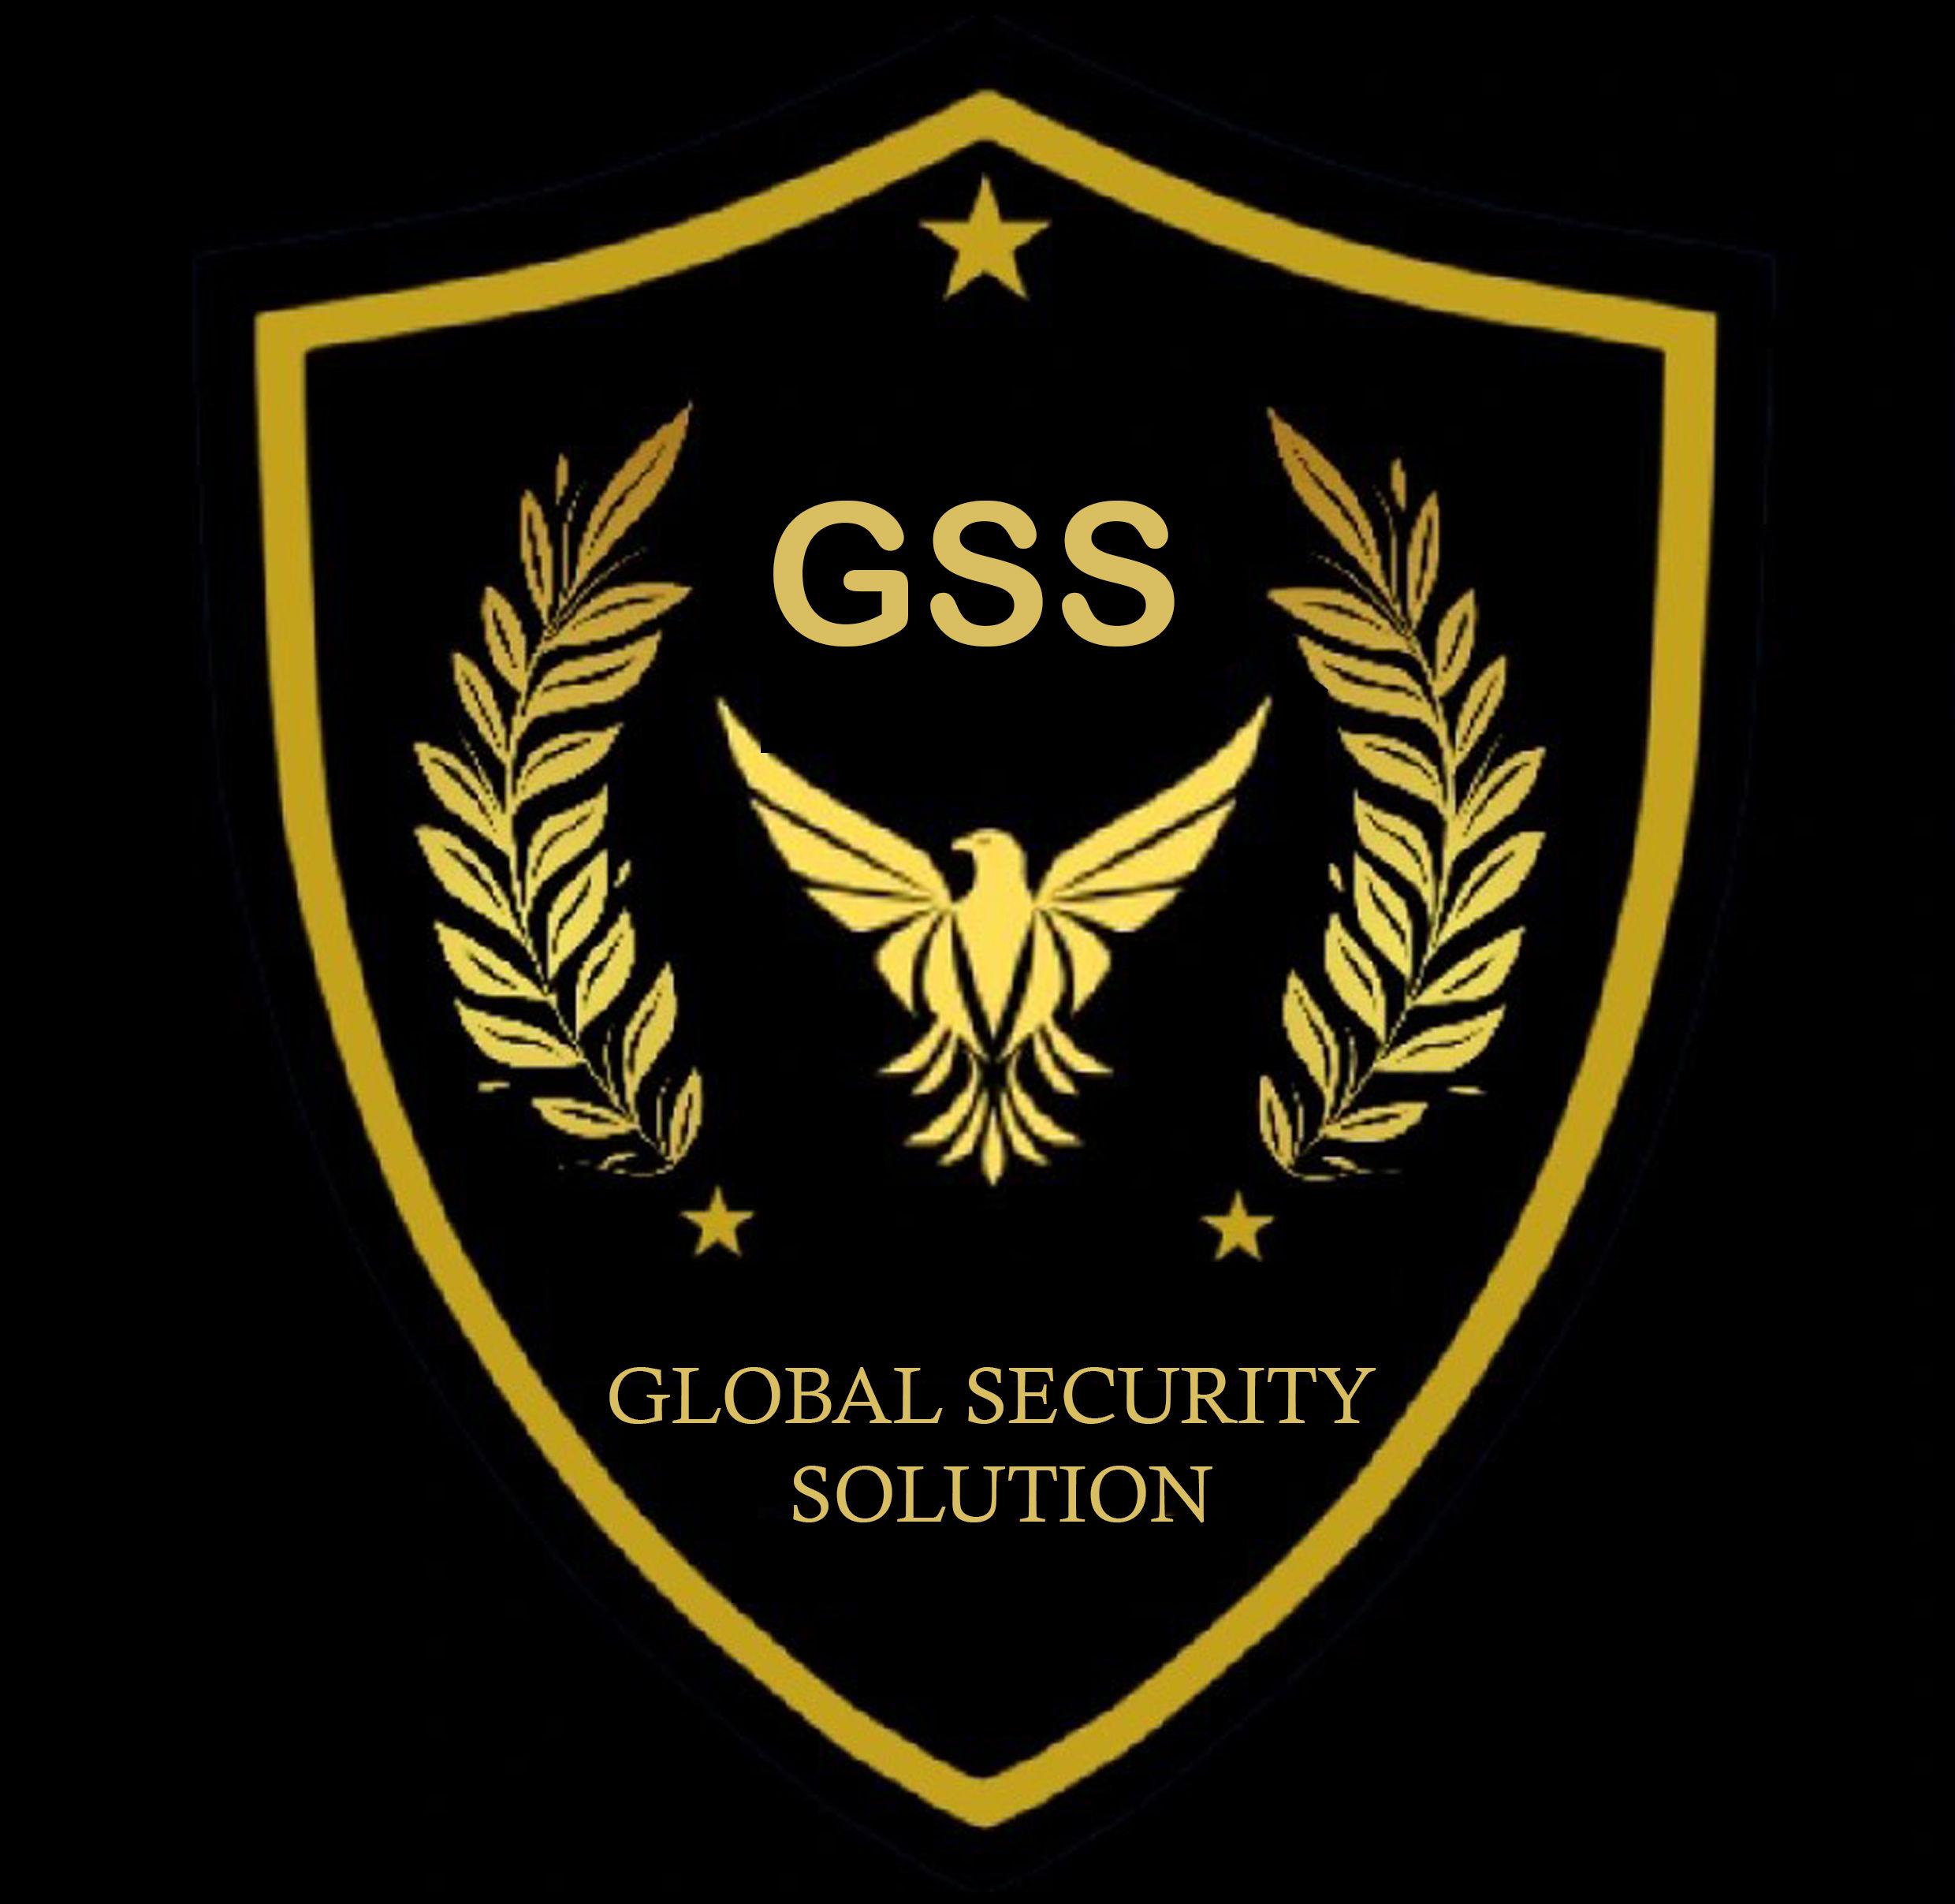 GLOBAL SECURITY SOLUTION